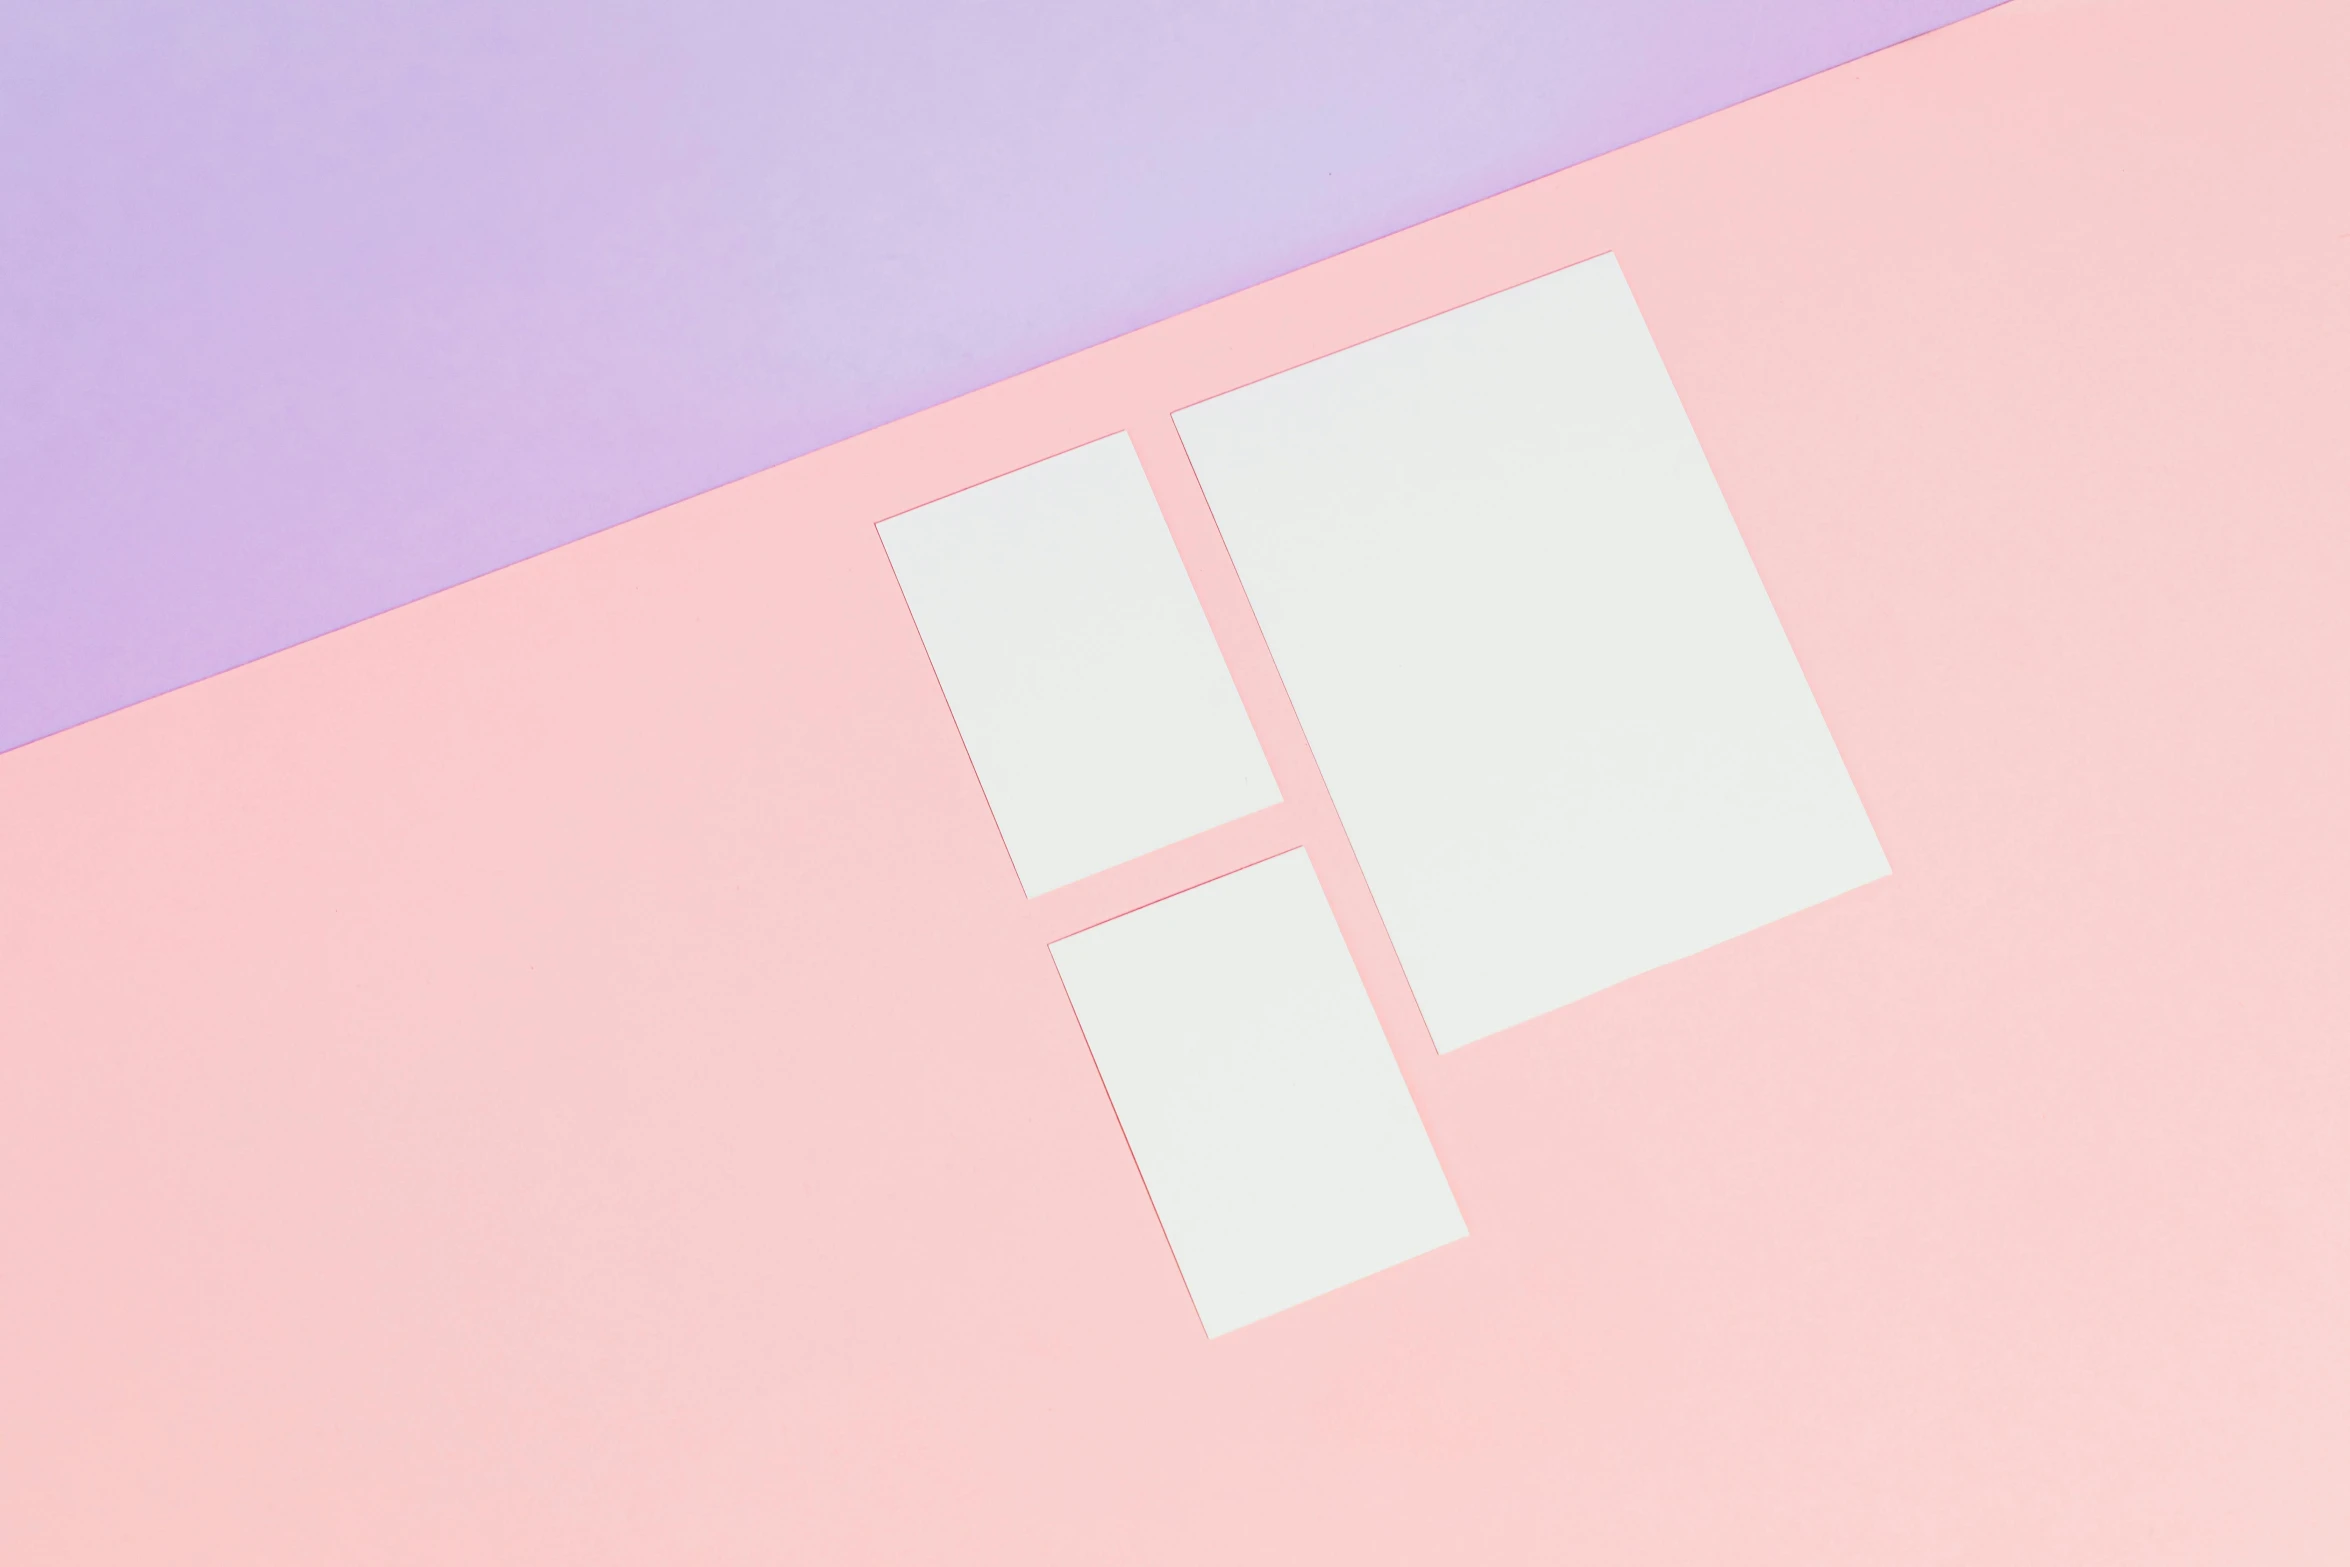 a pair of scissors sitting on top of a pink and purple surface, a minimalist painting, by Julia Pishtar, trending on unsplash, postminimalism, card template, rectangles, white panels, various sizes